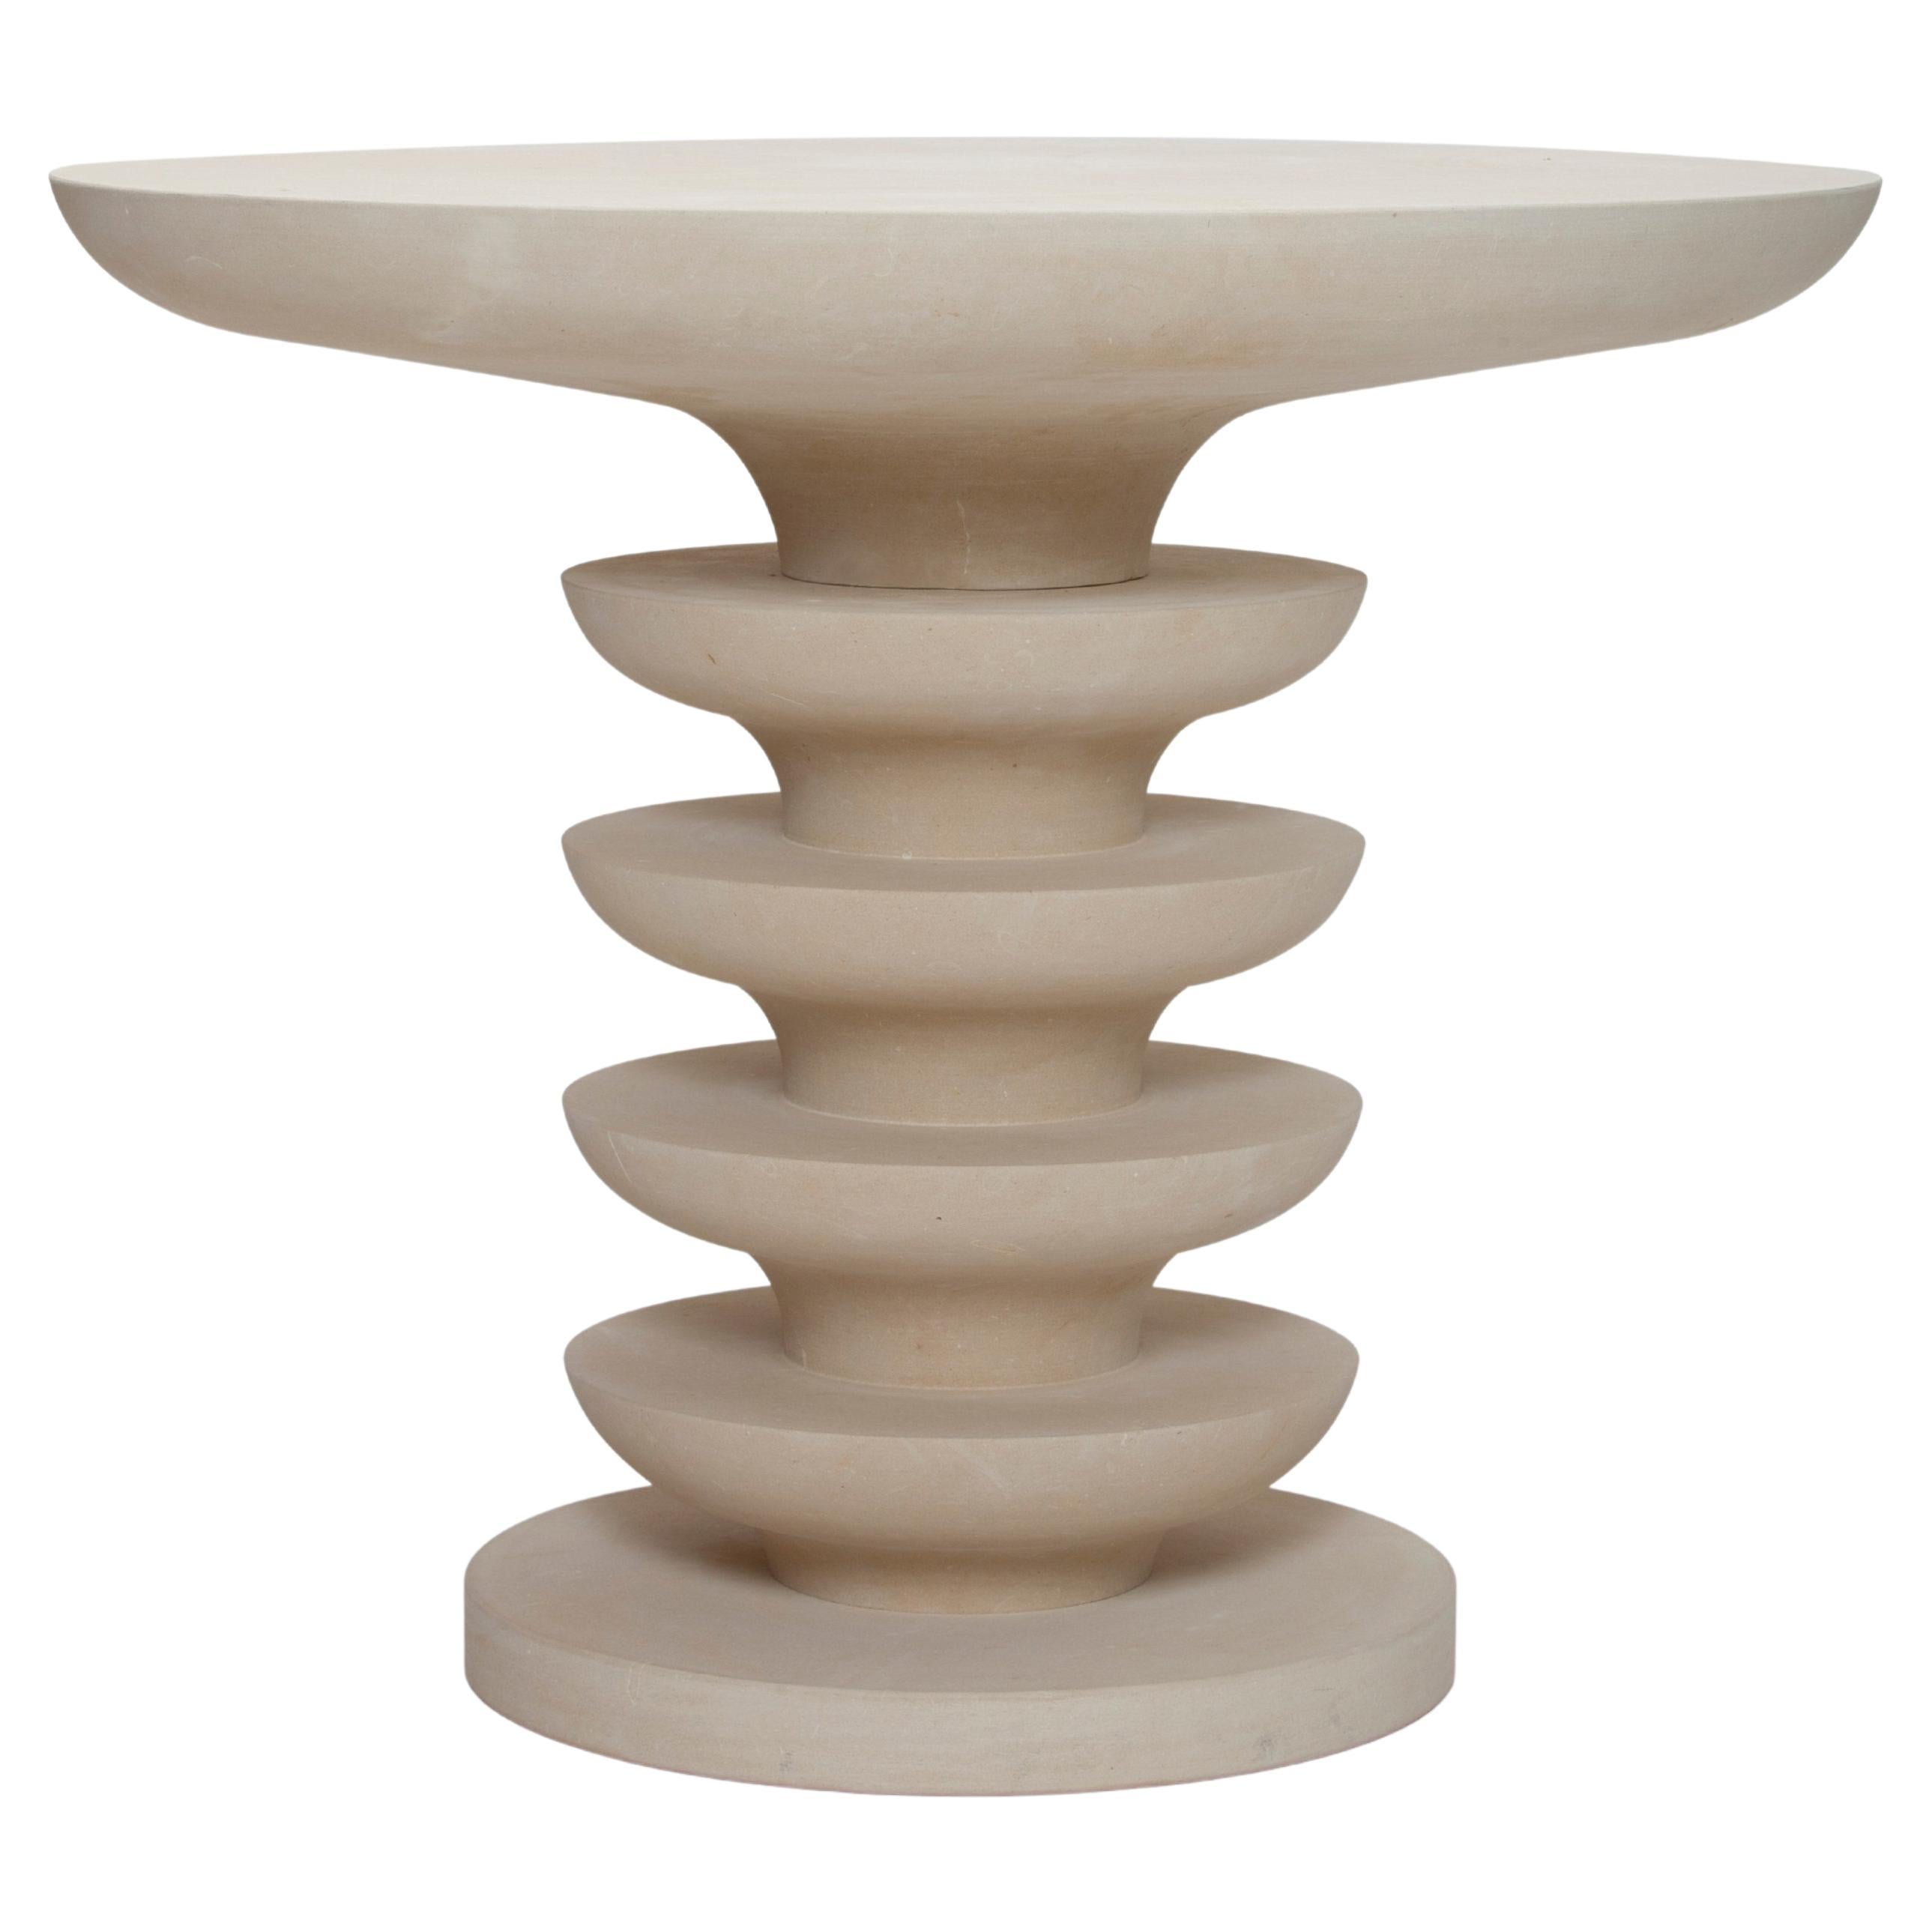 Contemporary Limestone Pedestal Table for Outdoor Settings